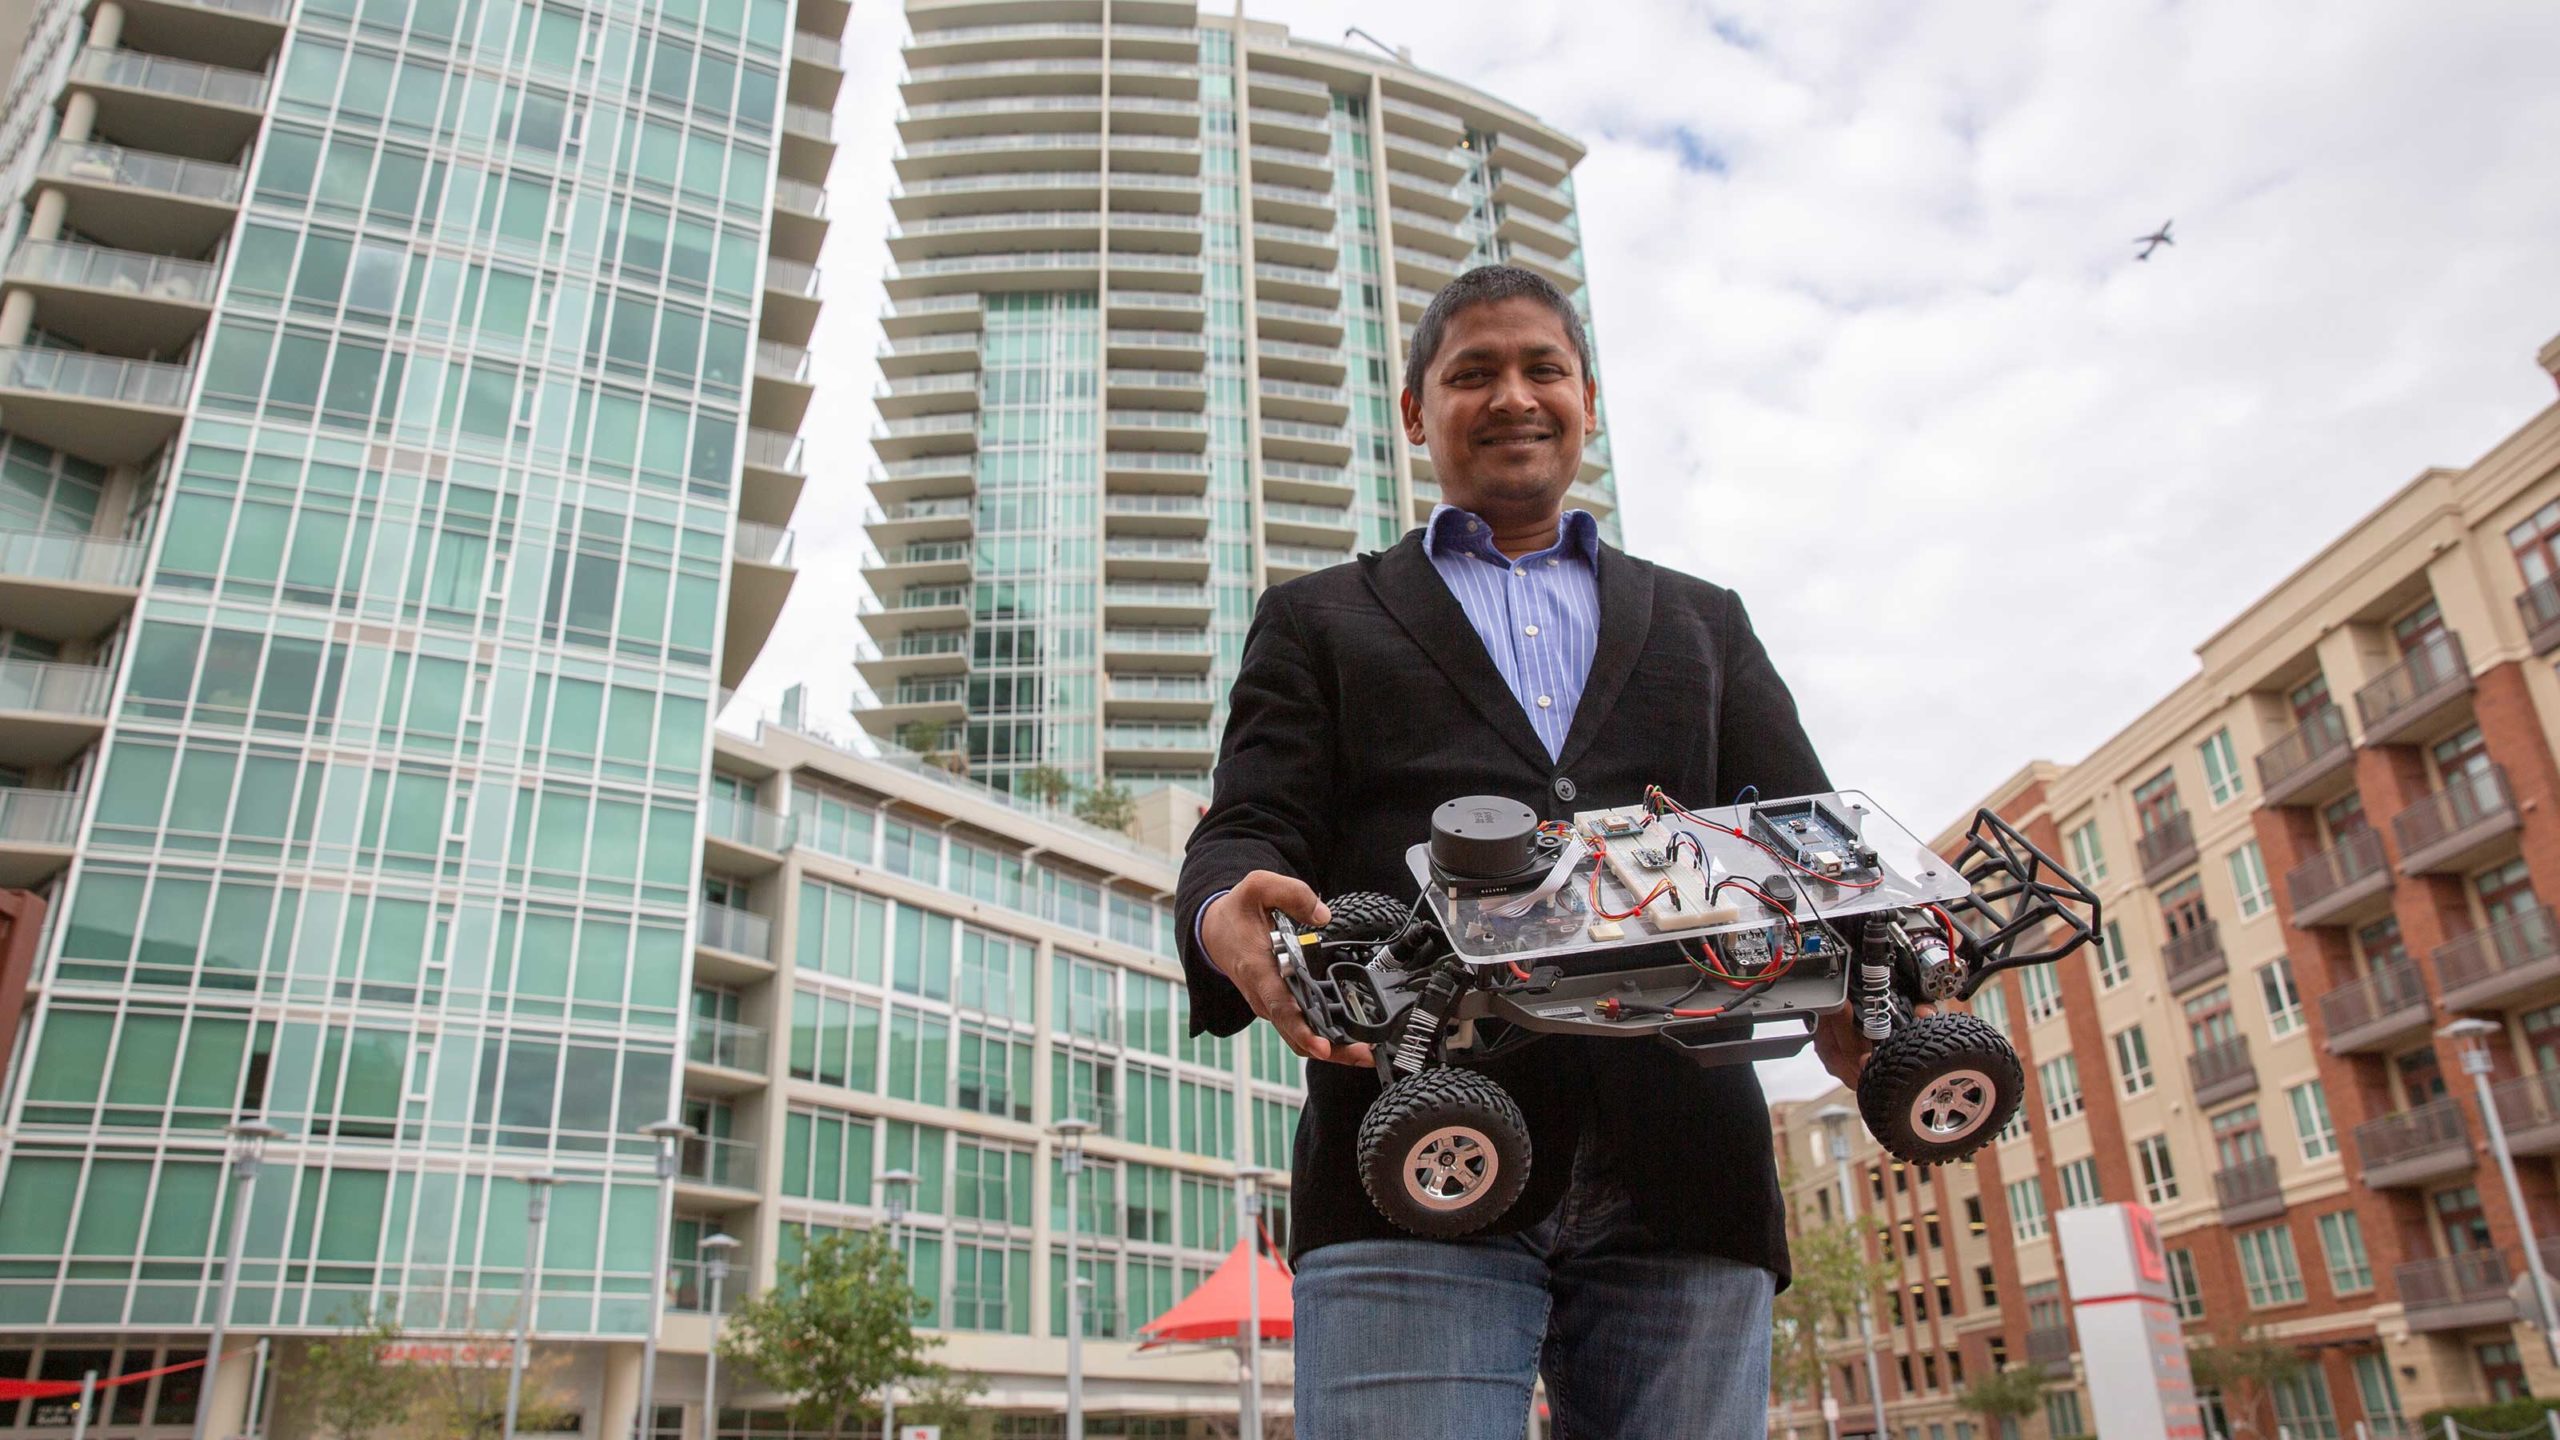 Aviral Shrivastava stands outside in downtown Tempe Arizona holding his small autonomous vehicle